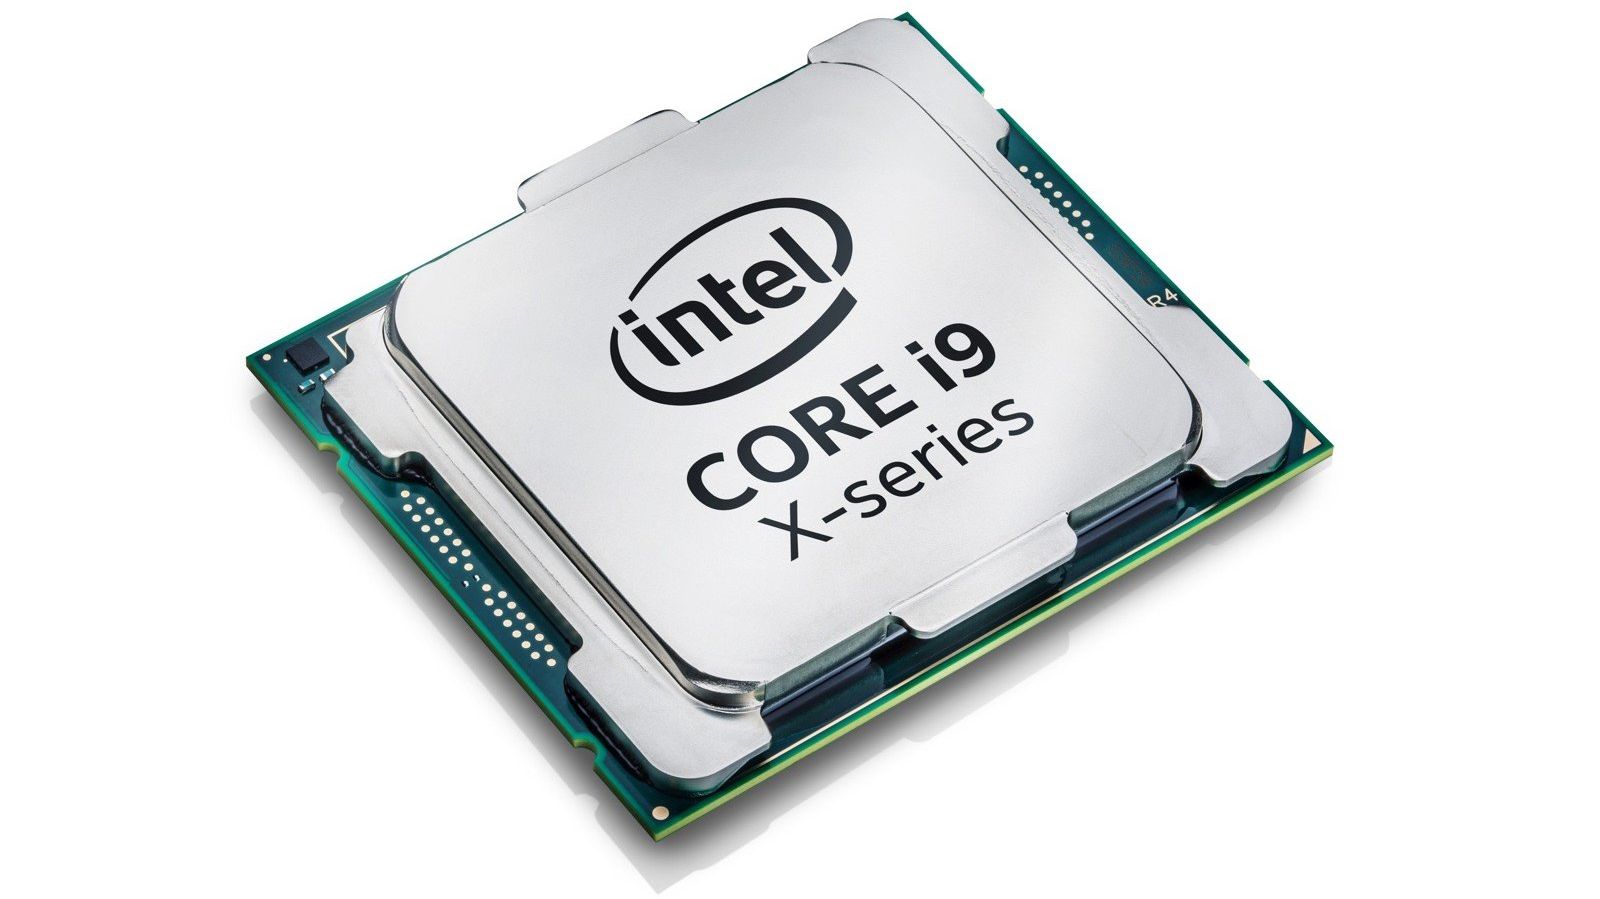 Intel published specifications of its 18-core processor